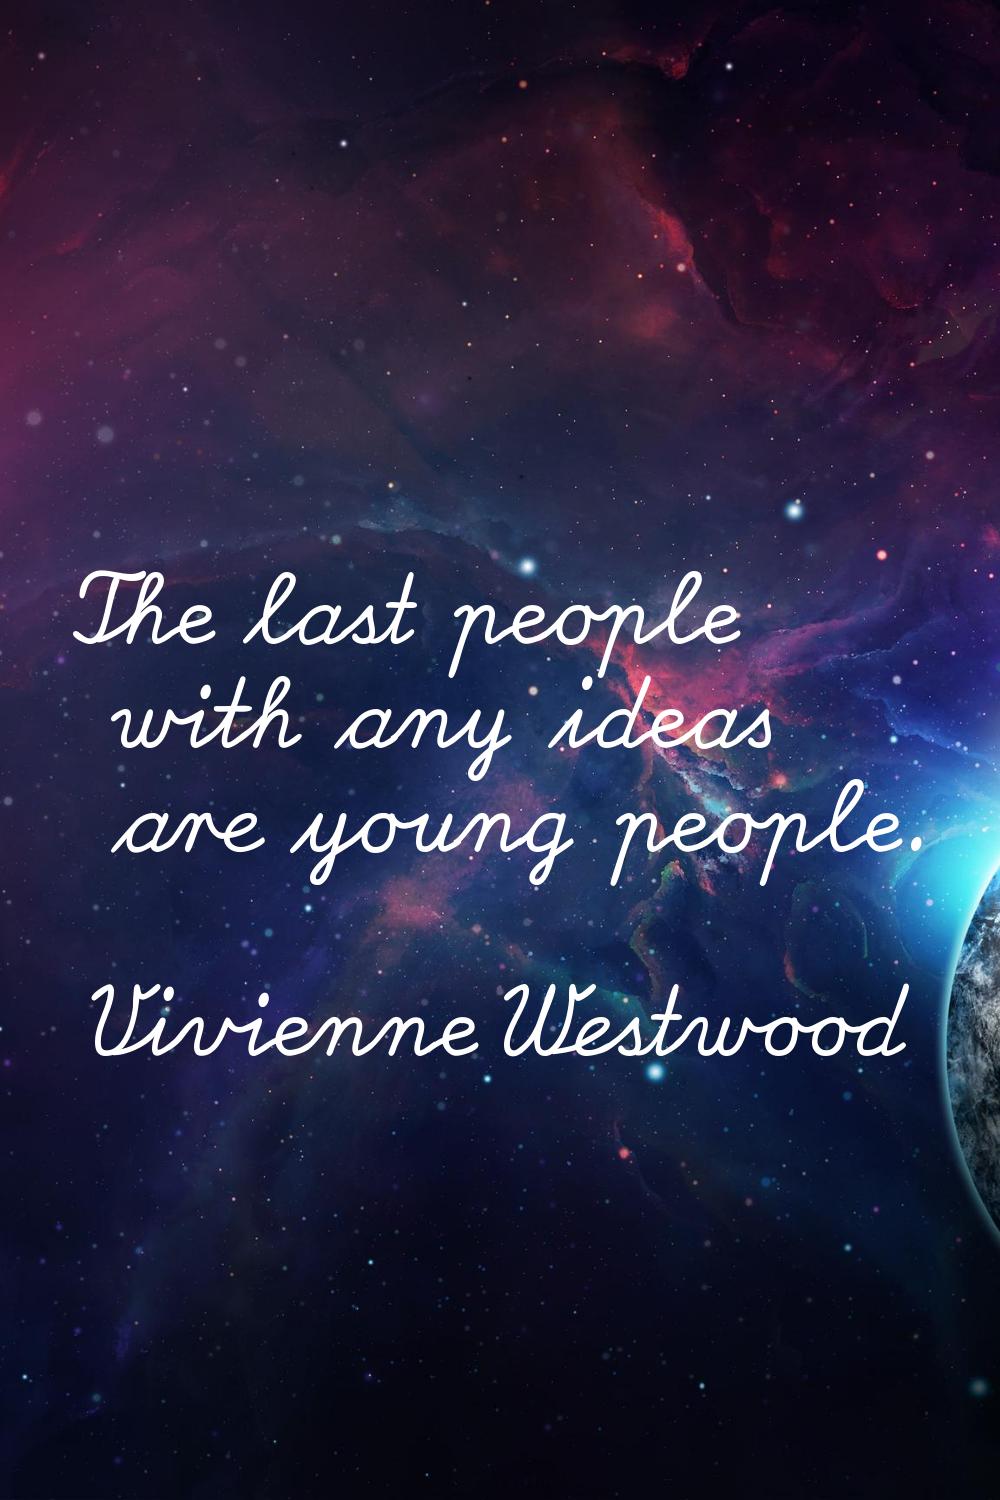 The last people with any ideas are young people.